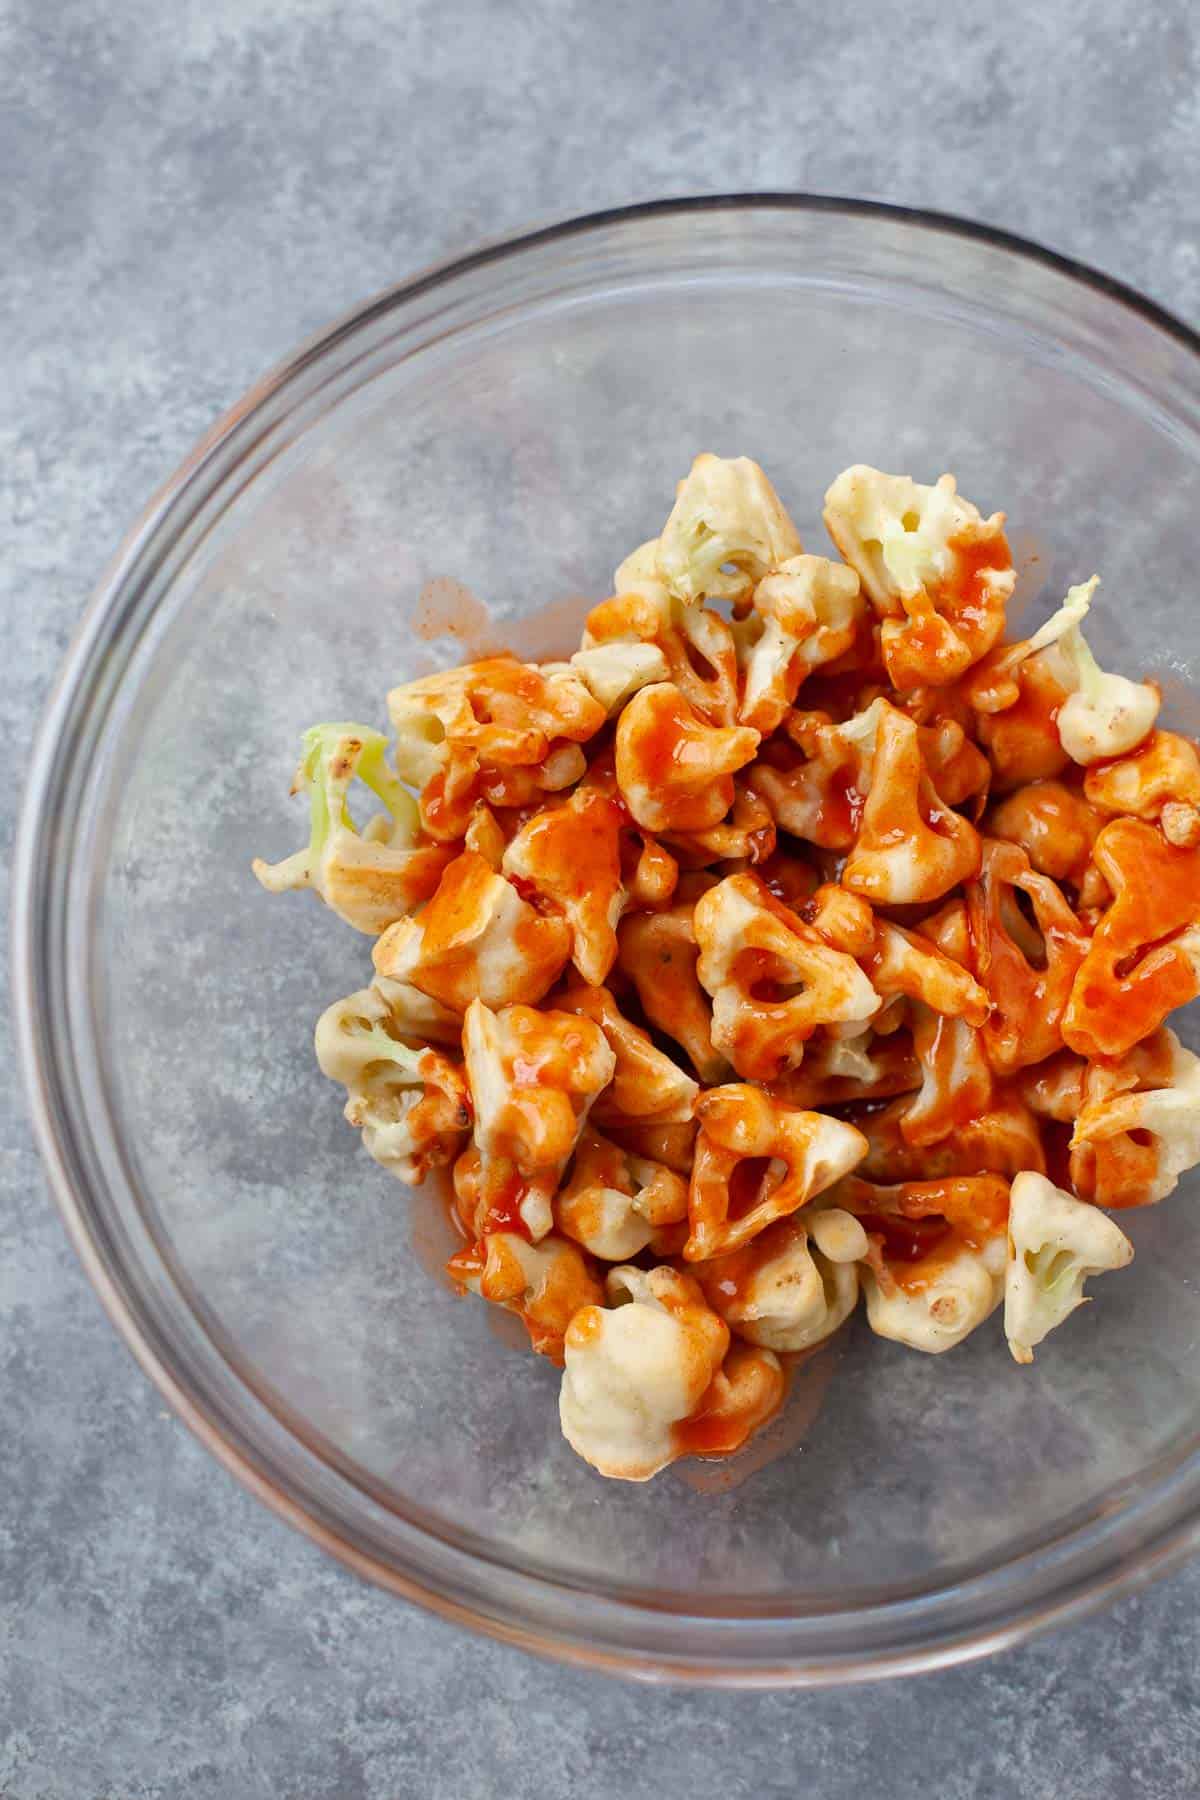 Cauliflower pieces with buffalo sauced drizzled on top